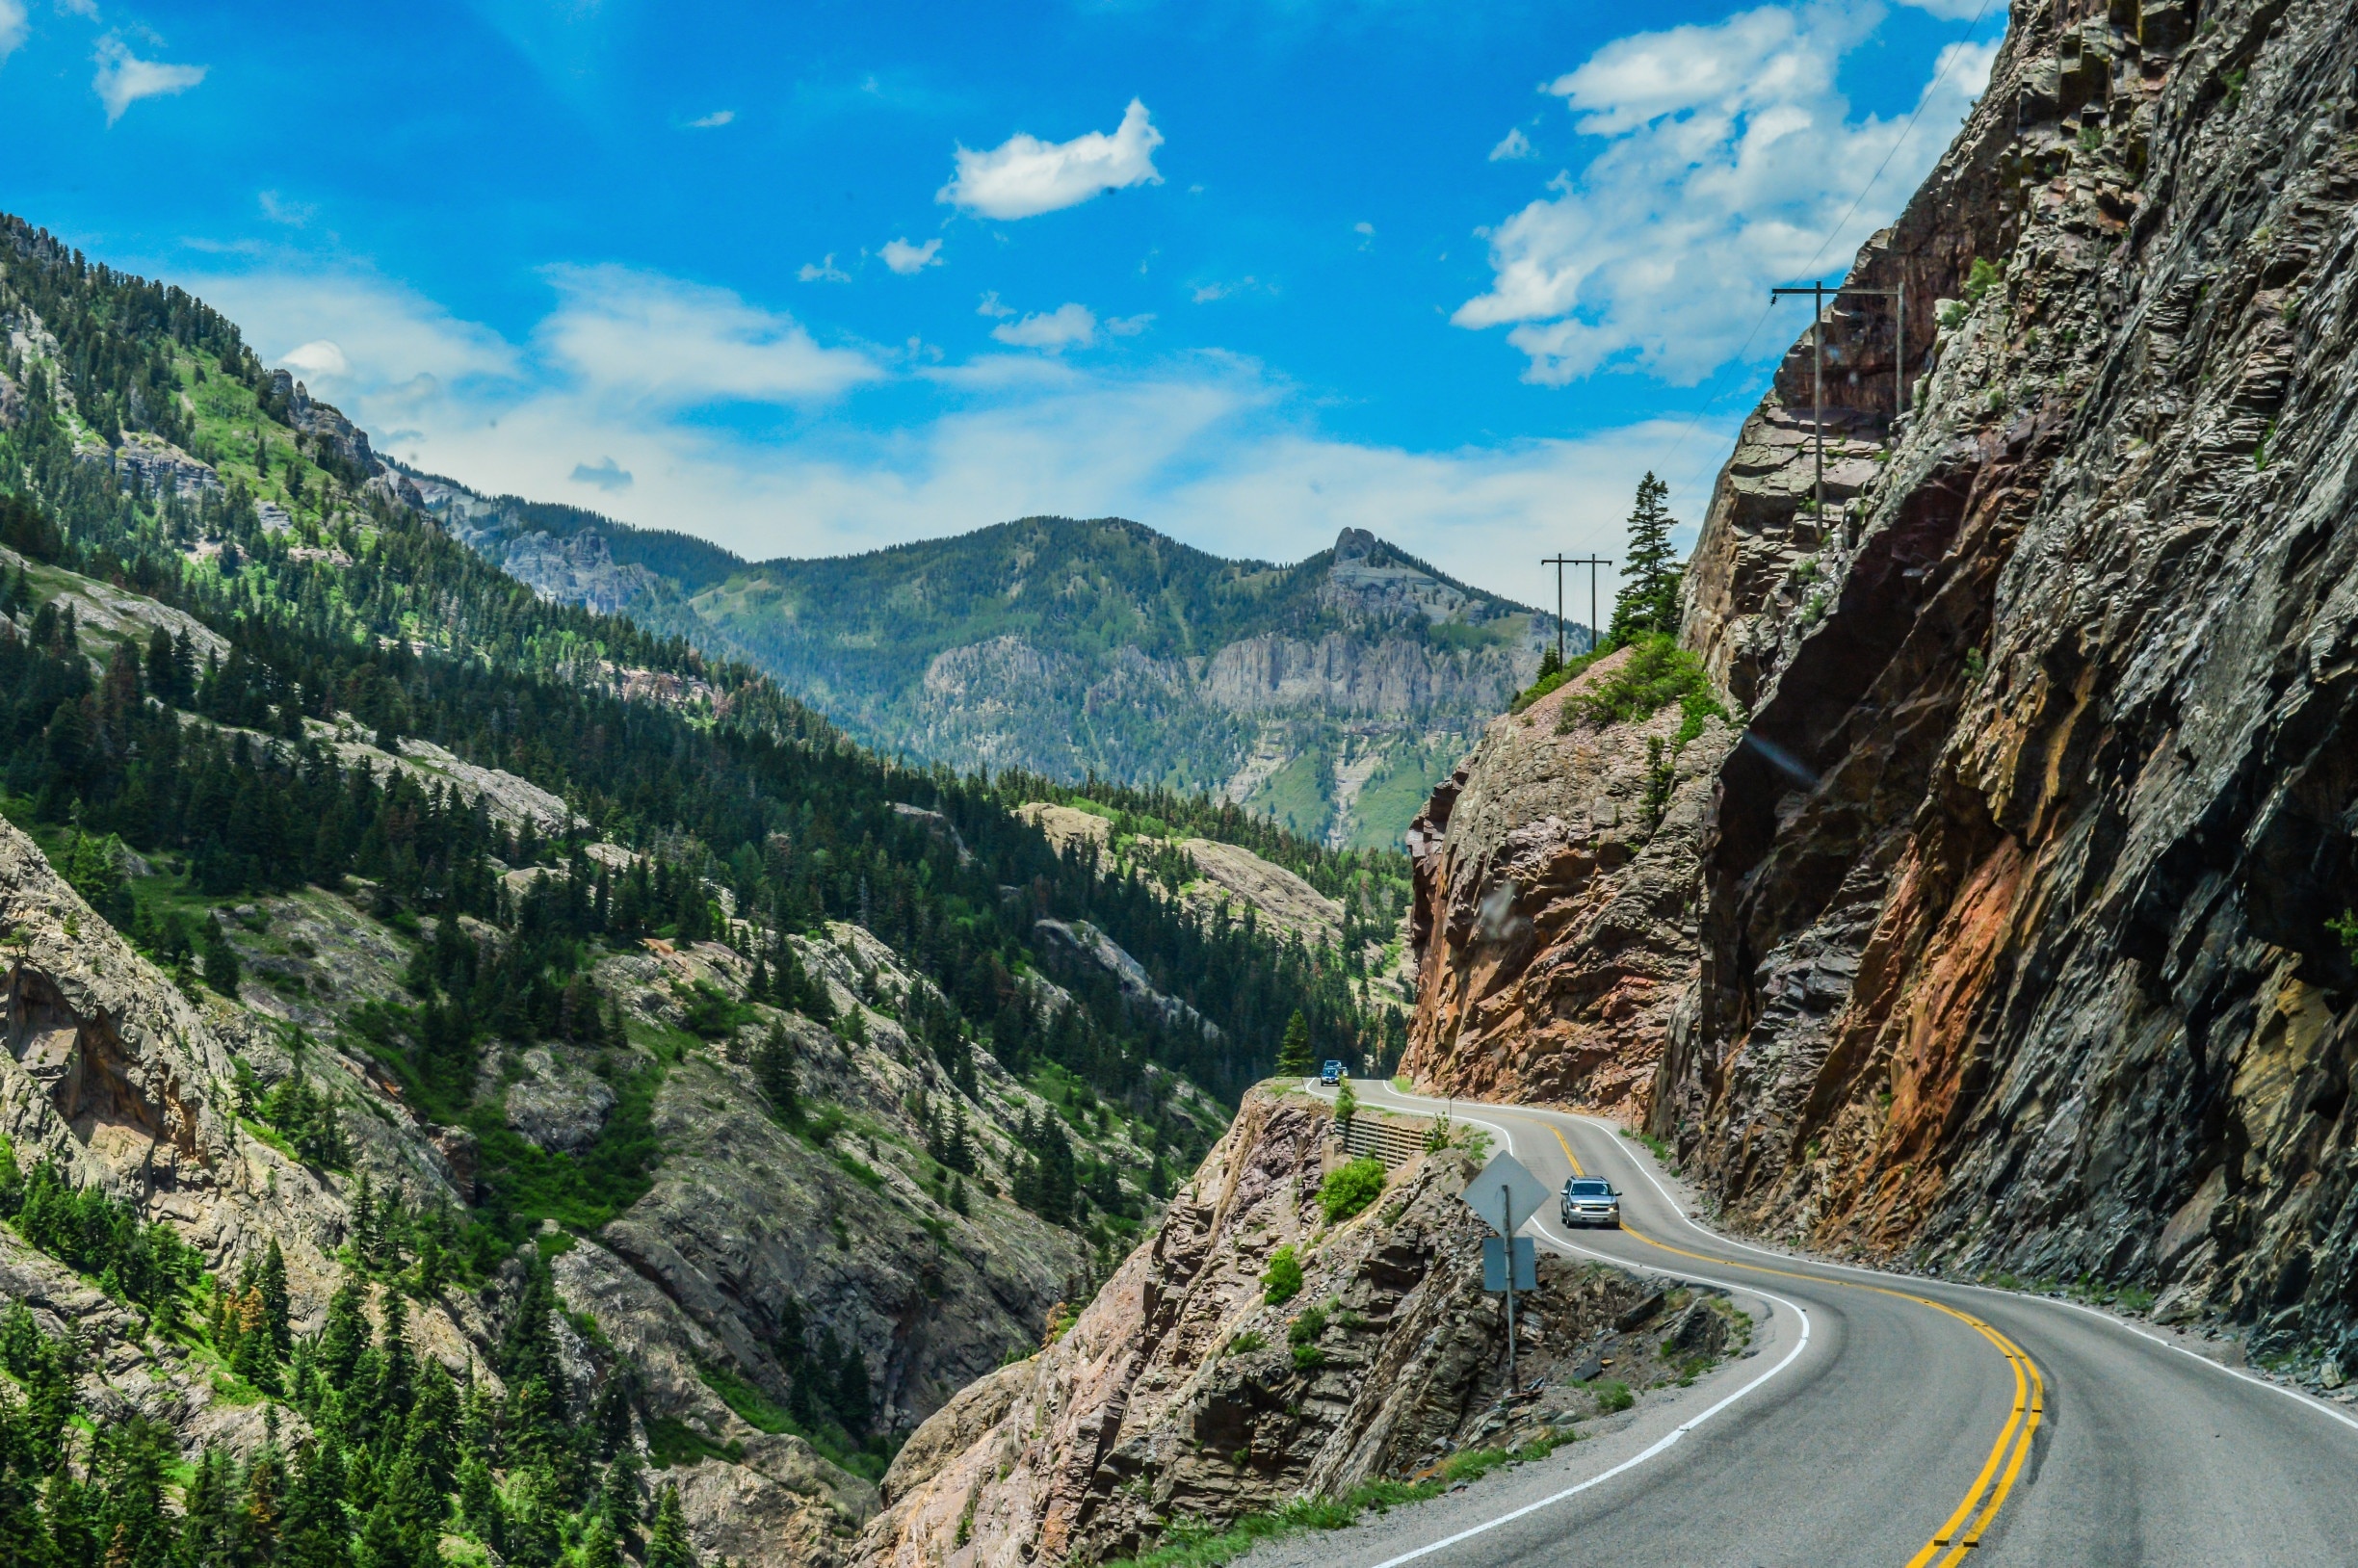 A section of US Route 550 that runs from Silverton to Ouray in Colorado is knows as "The Million Dollar Highway", and it's a thrilling (or terrifying) ride. Narrow roads, steep cliff walls, dizzying drop-offs....and no guard rails. It all makes for a white-knucke drive, albeit one with breath-taking views. There's some conjecture about the origin of the name - some say it's because it cost a million dollars to create, others say it's because of the million dollar views. Either way, it's a drive you won't soon forget. #colorado #ouray #milliondollarhighway #silverton #roadtrip #beautifuldrives